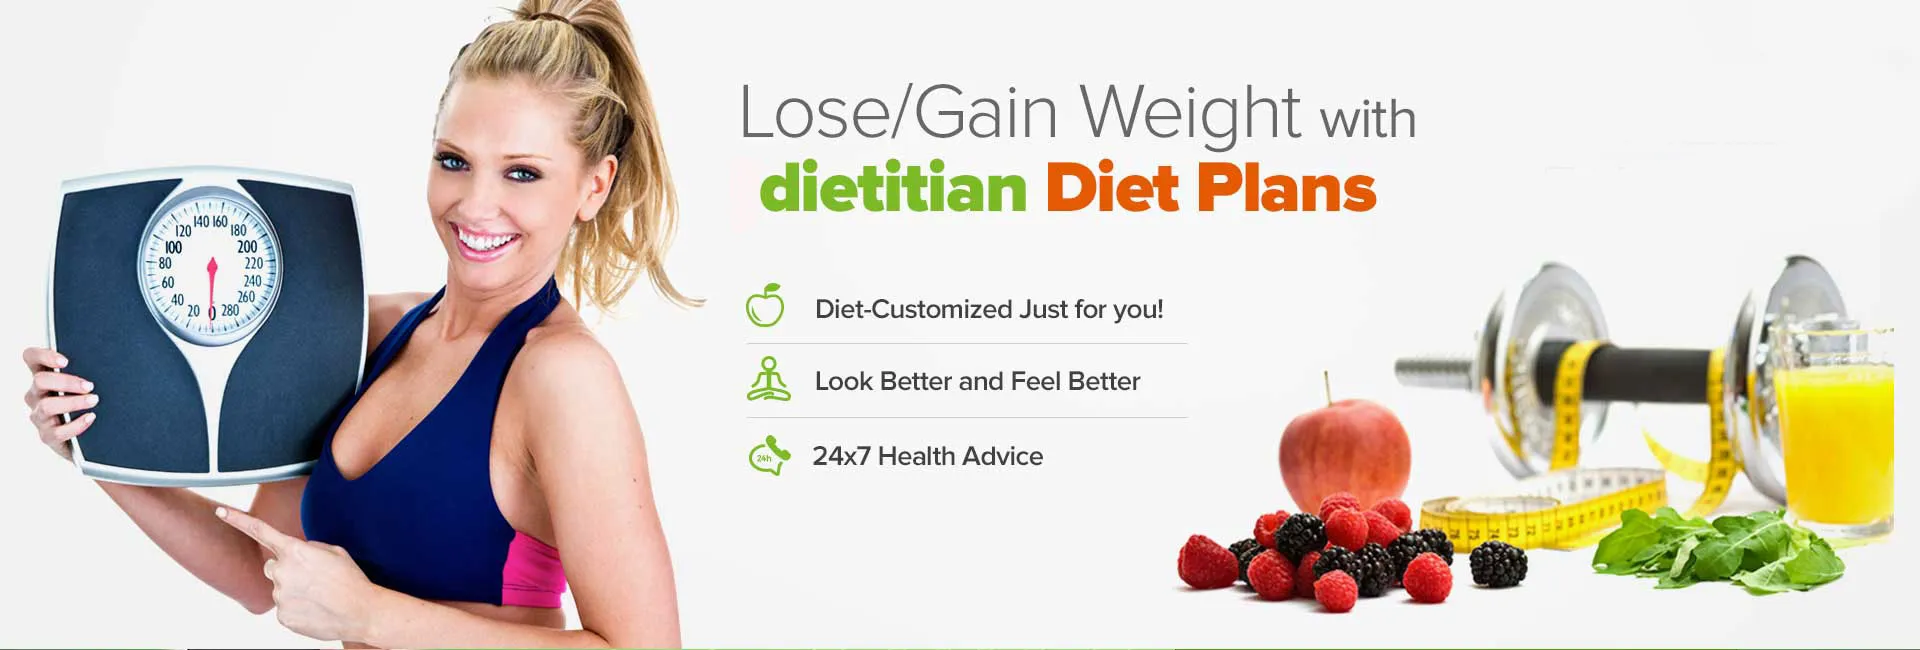 Diet Plan For Weight Loss In Toronto